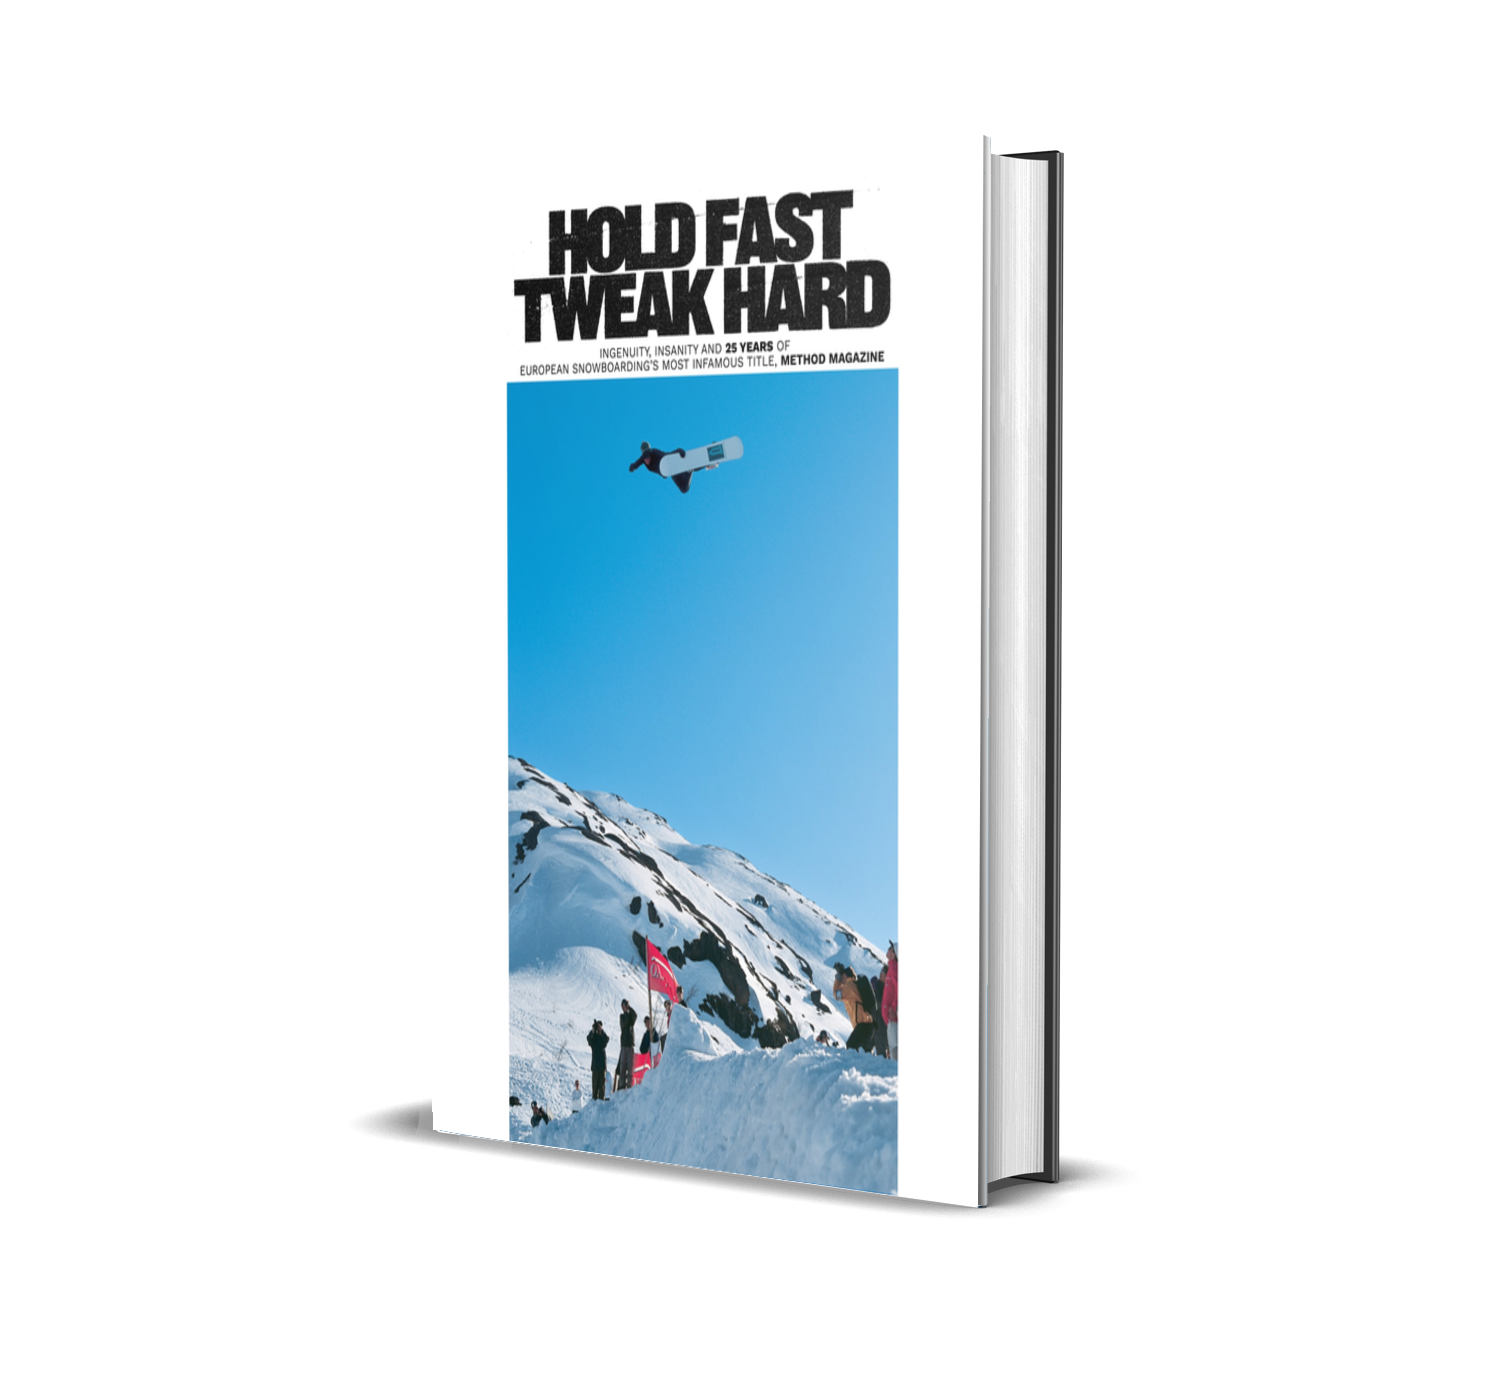 » Hold Fast, Tweak Hard: Ingenuity, Insanity and 25 Years of European Snowboarding's Most Infamous Title, Method Magazine (100% off)